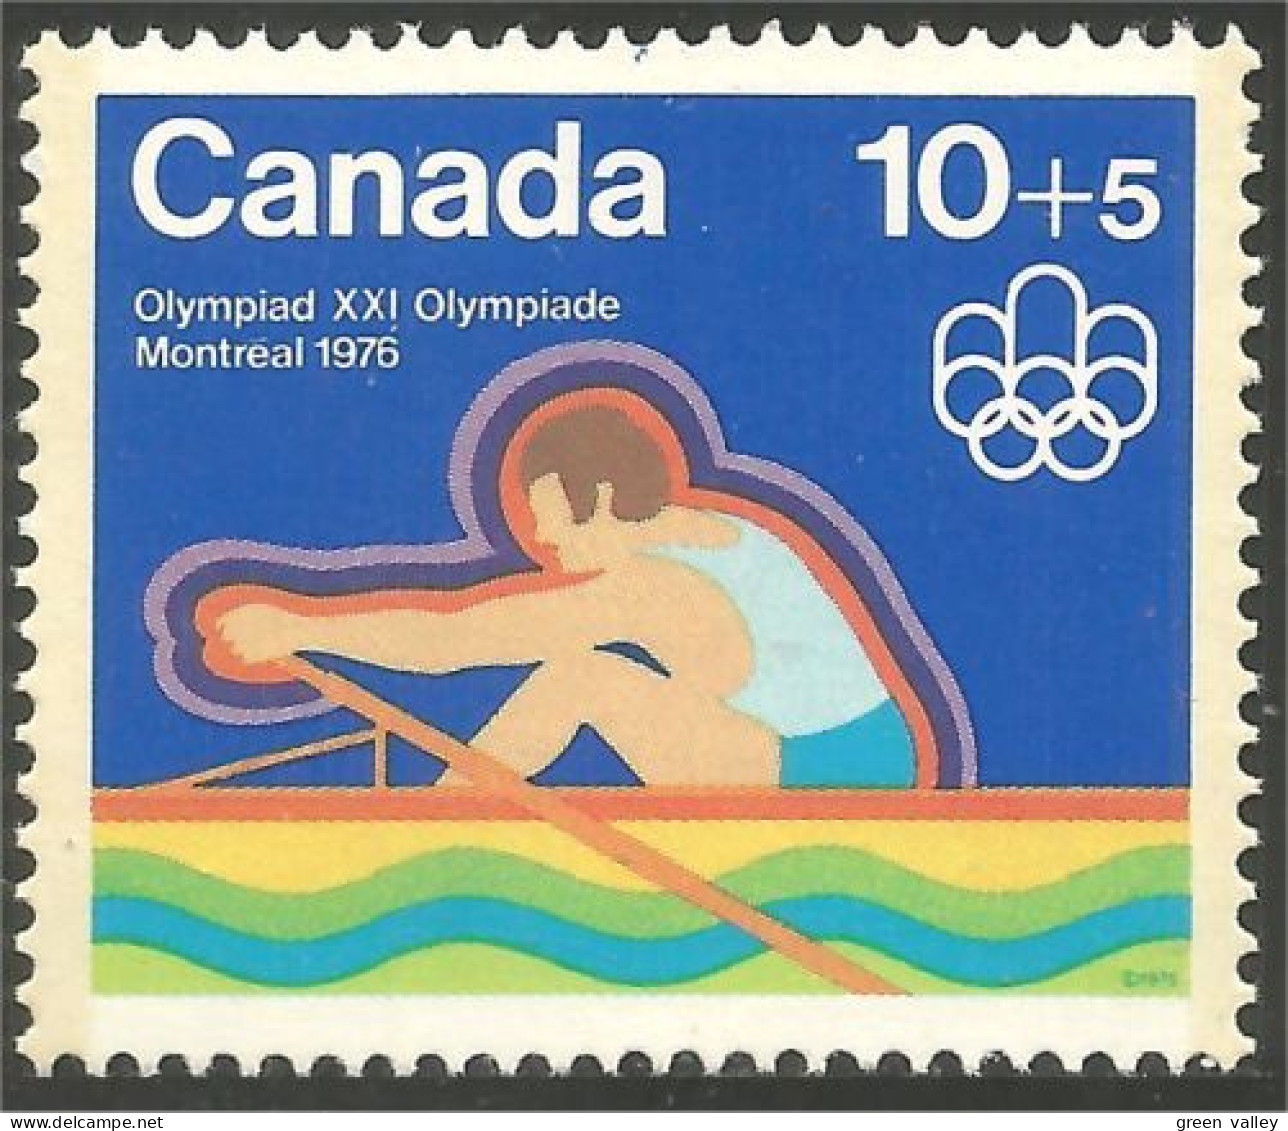 Canada 10c+5c Aviron Rowing Jeux Olympiques Montreal 1976 Olympic Games MNH ** Neuf SC (CB-05a) - Nuevos